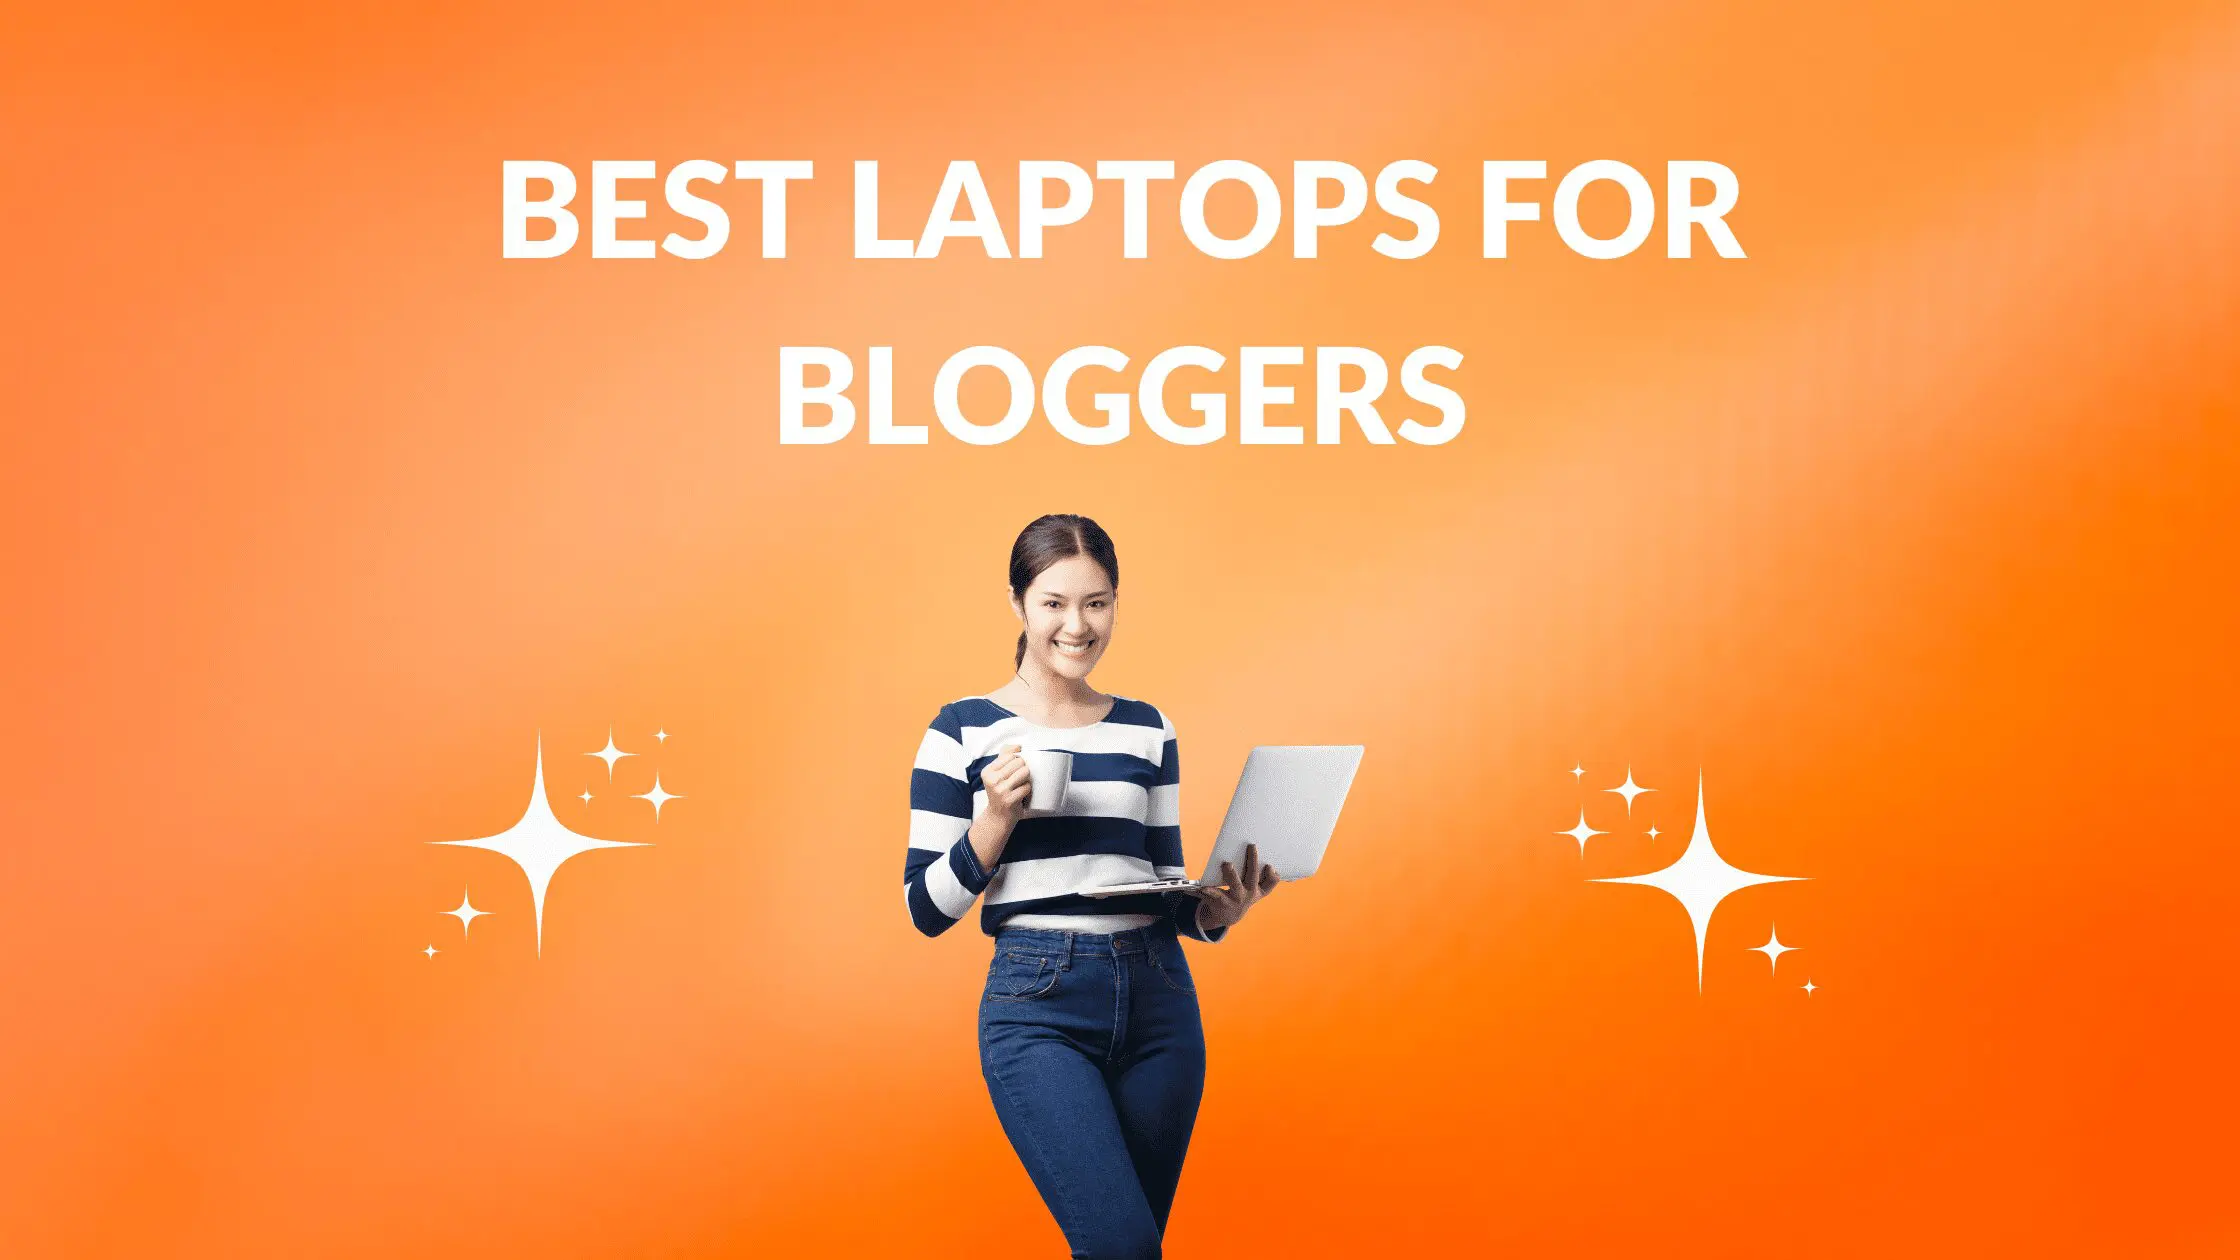 What is the best laptop for Blogging